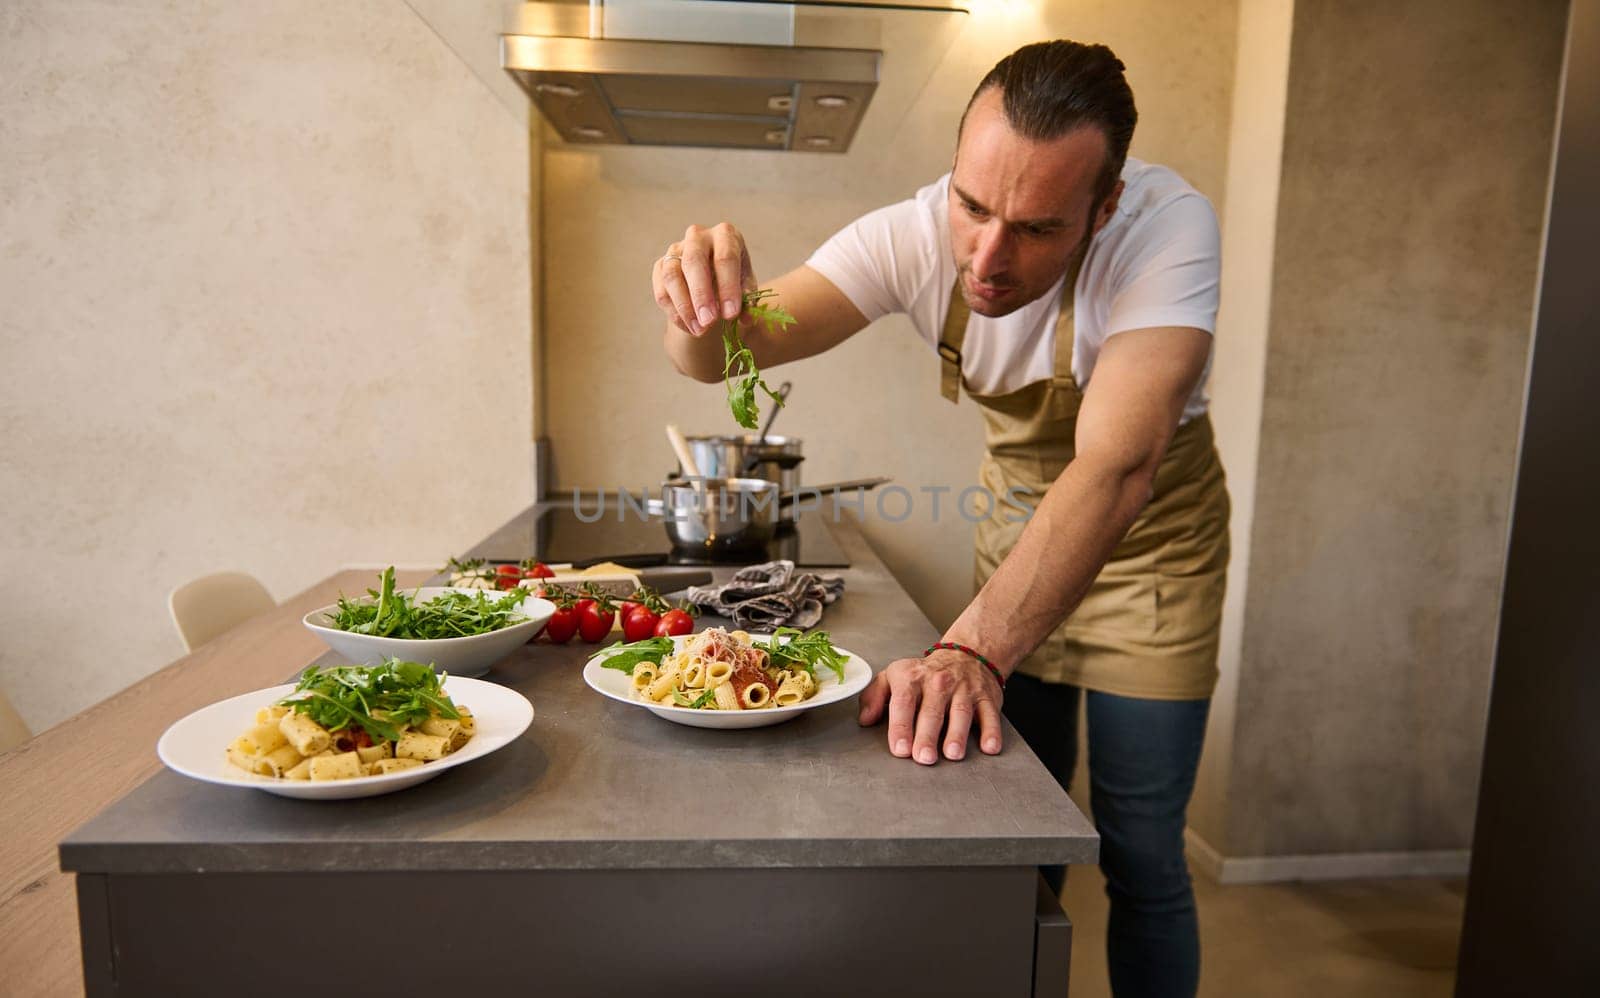 Attractive European male chef decorating spaghetti Bolognese with fresh greens, standing at kitchen island in the home kitchen. Man cooking dinner at home by artgf